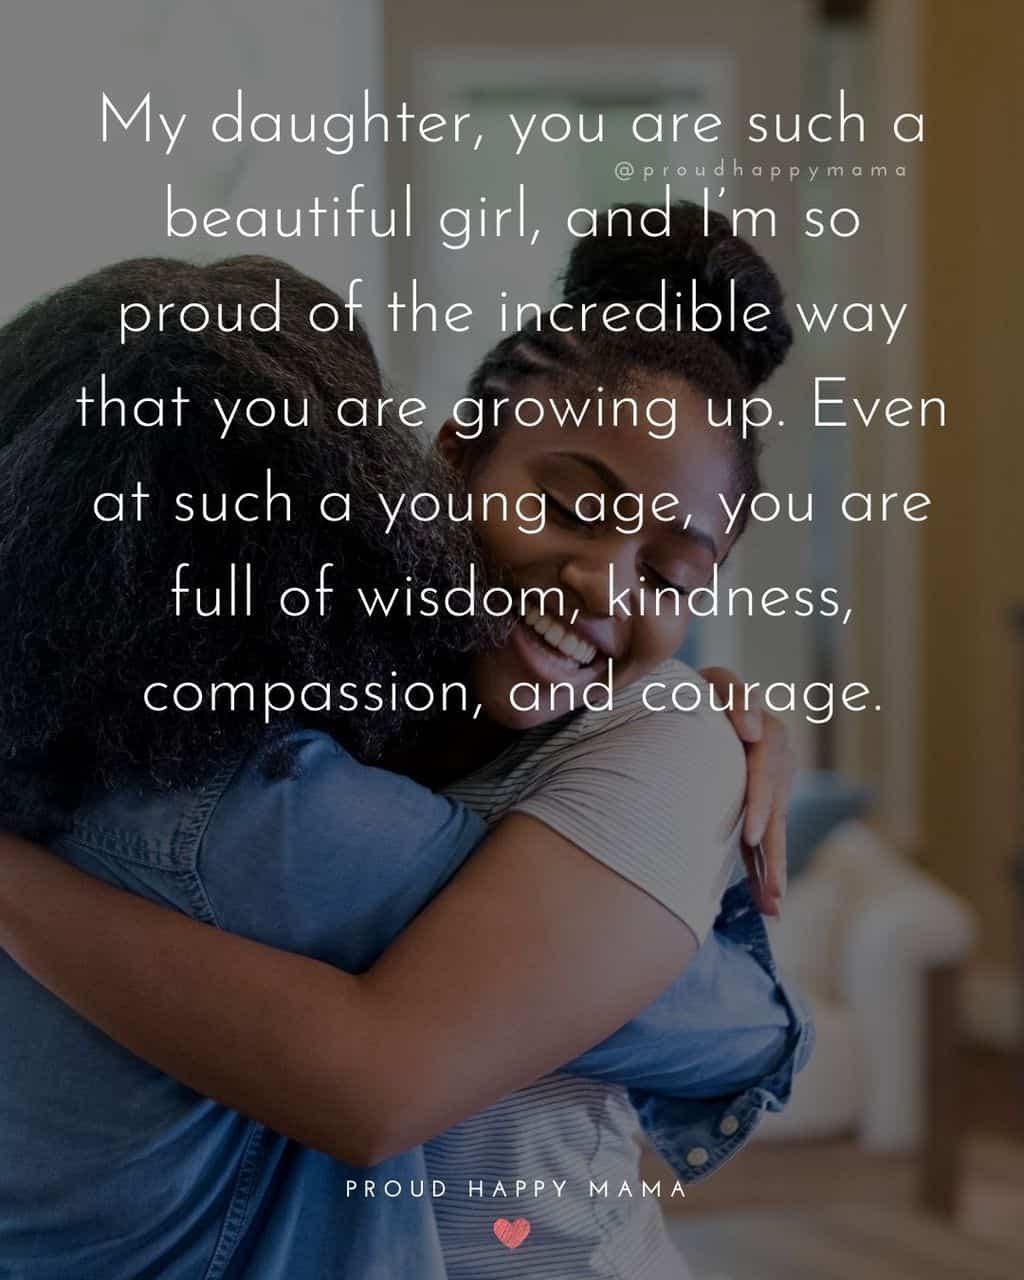 happiness quotes for daughter - ‘My daughter, you are such a beautiful girl, and I’m so proud of the incredible way that you are growing up. Even at such a